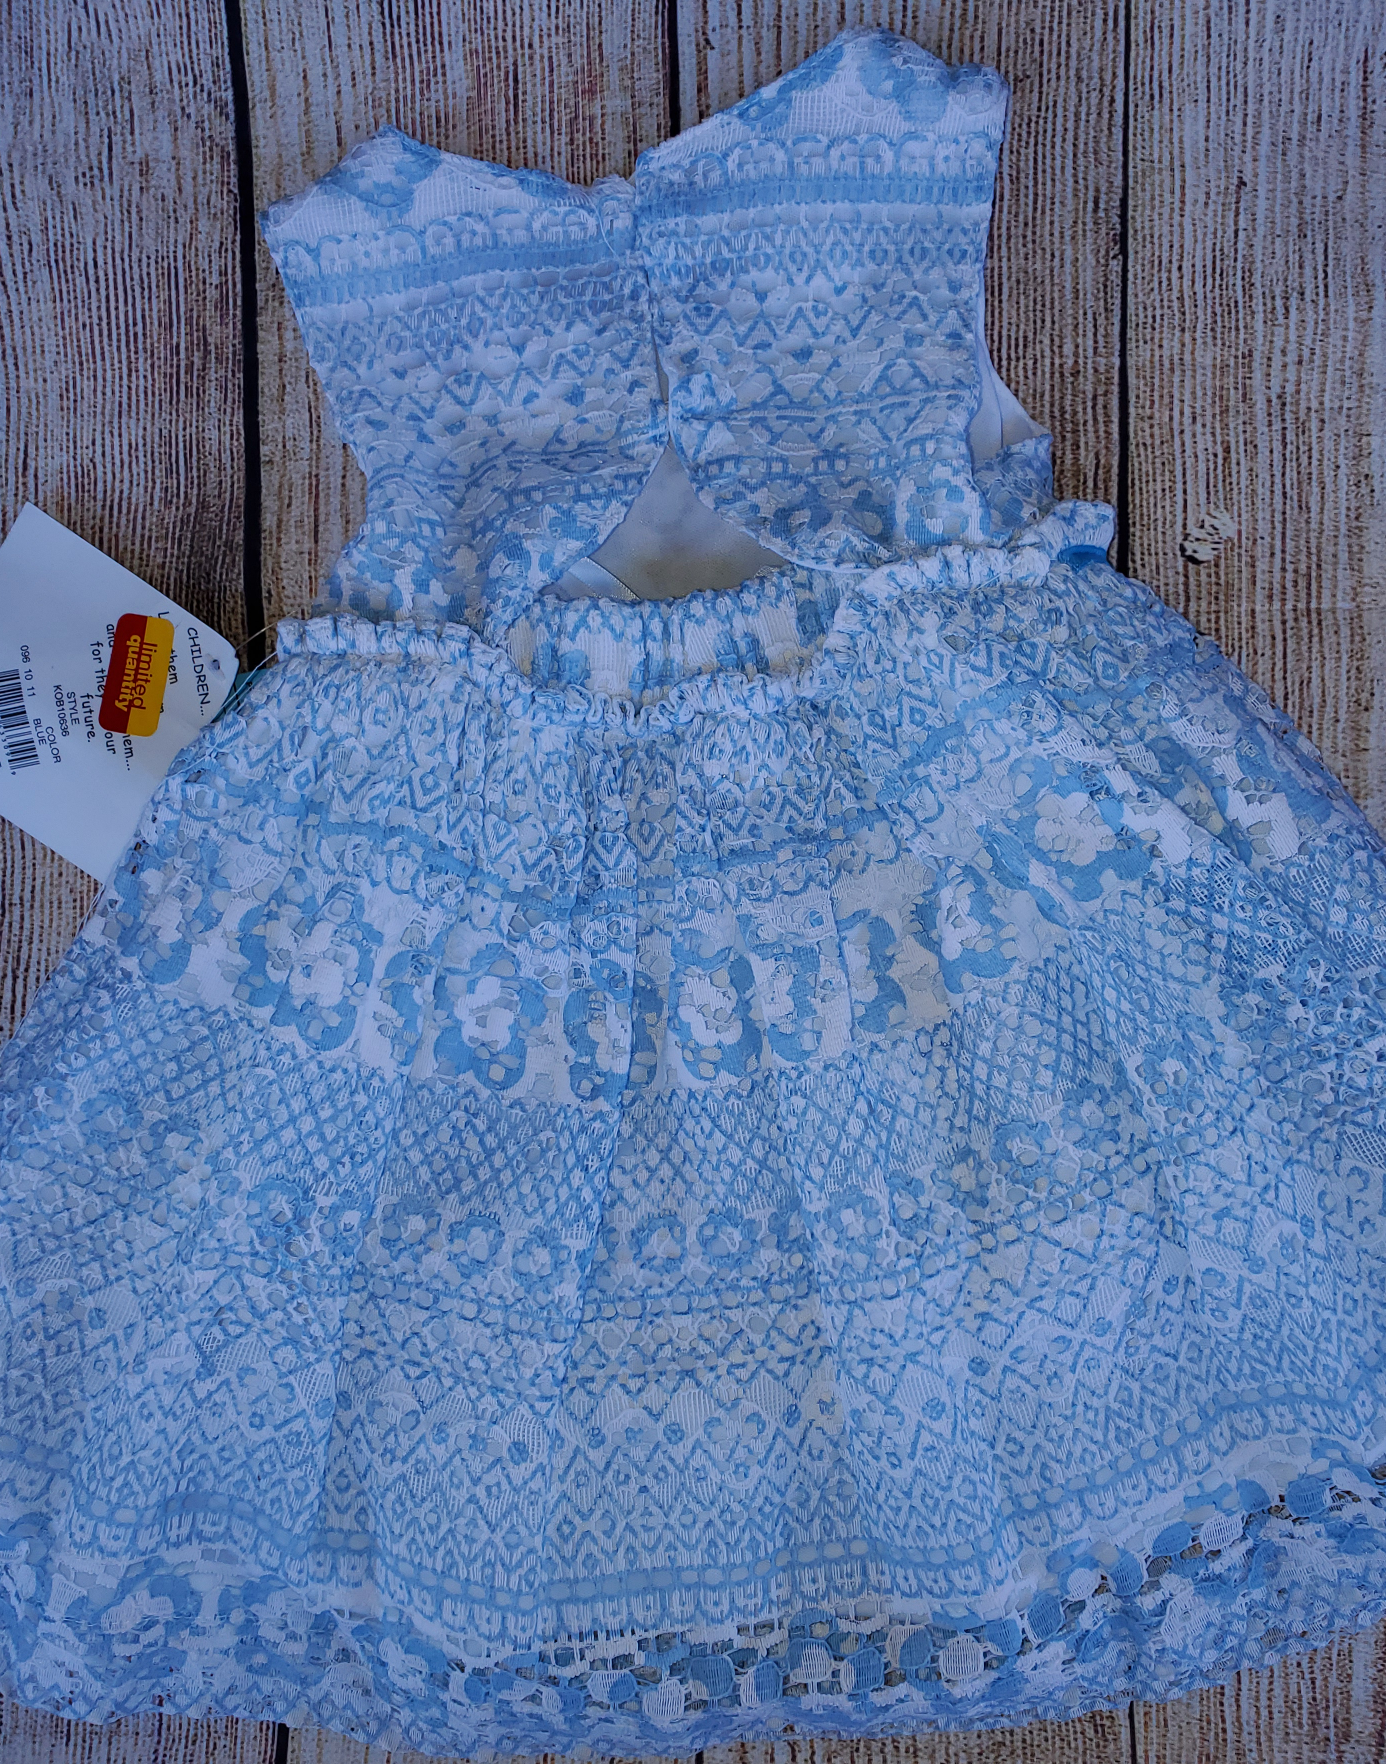 New Baby girl  blue and white  dress sz 12 months